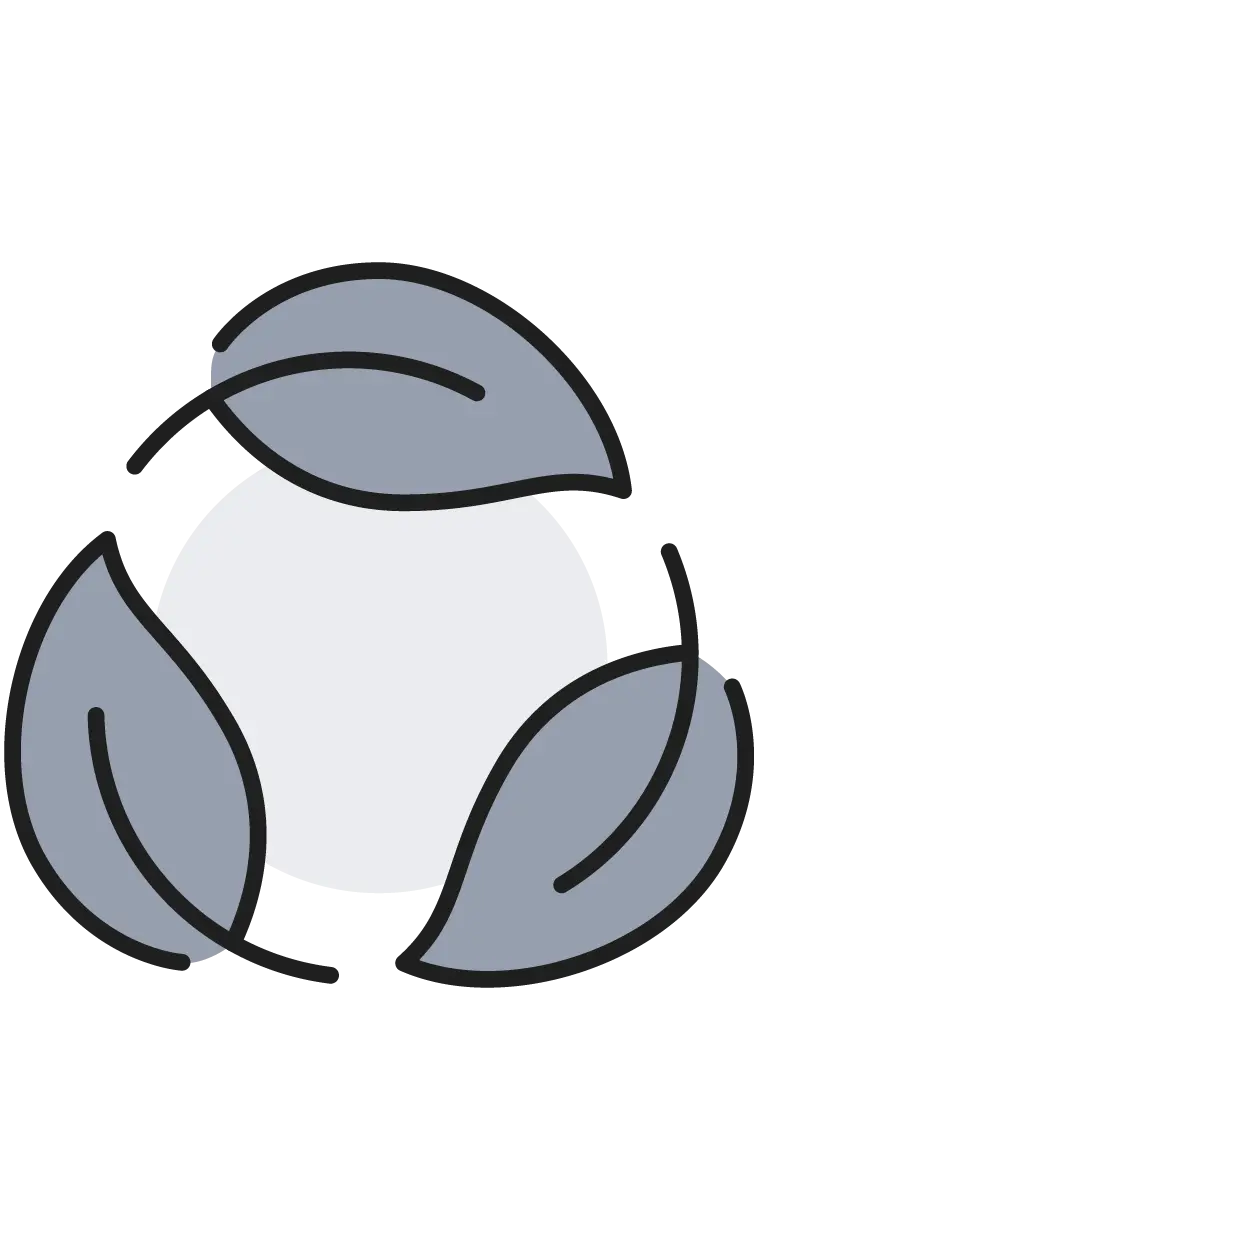 Icon of three leaves rotating in circle